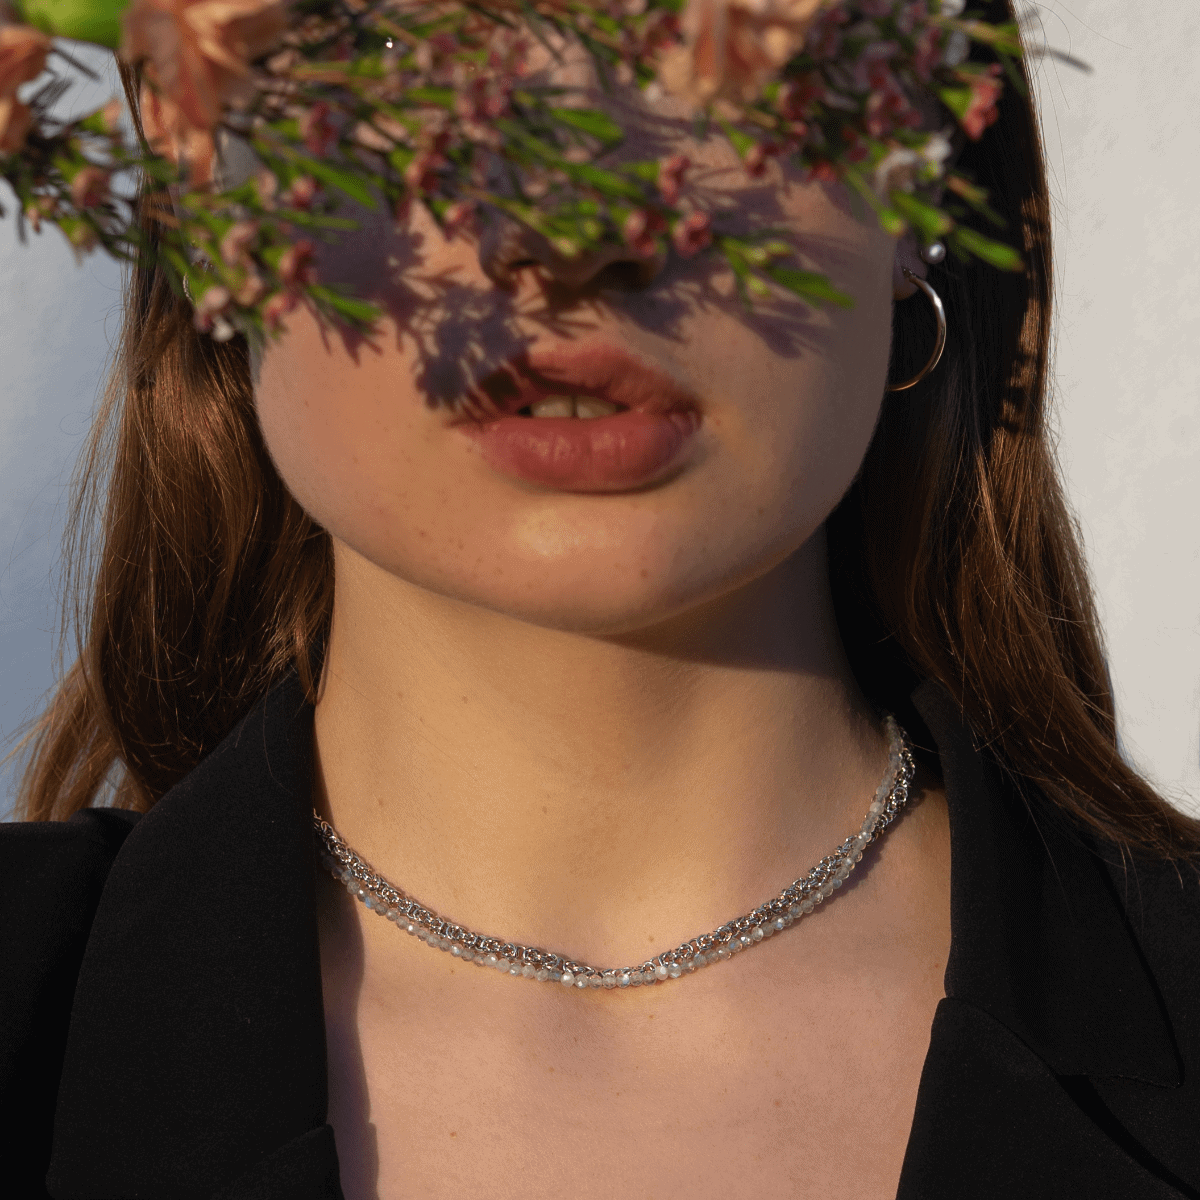 Gemstones necklace choker from labradorite with silver necklace on model.